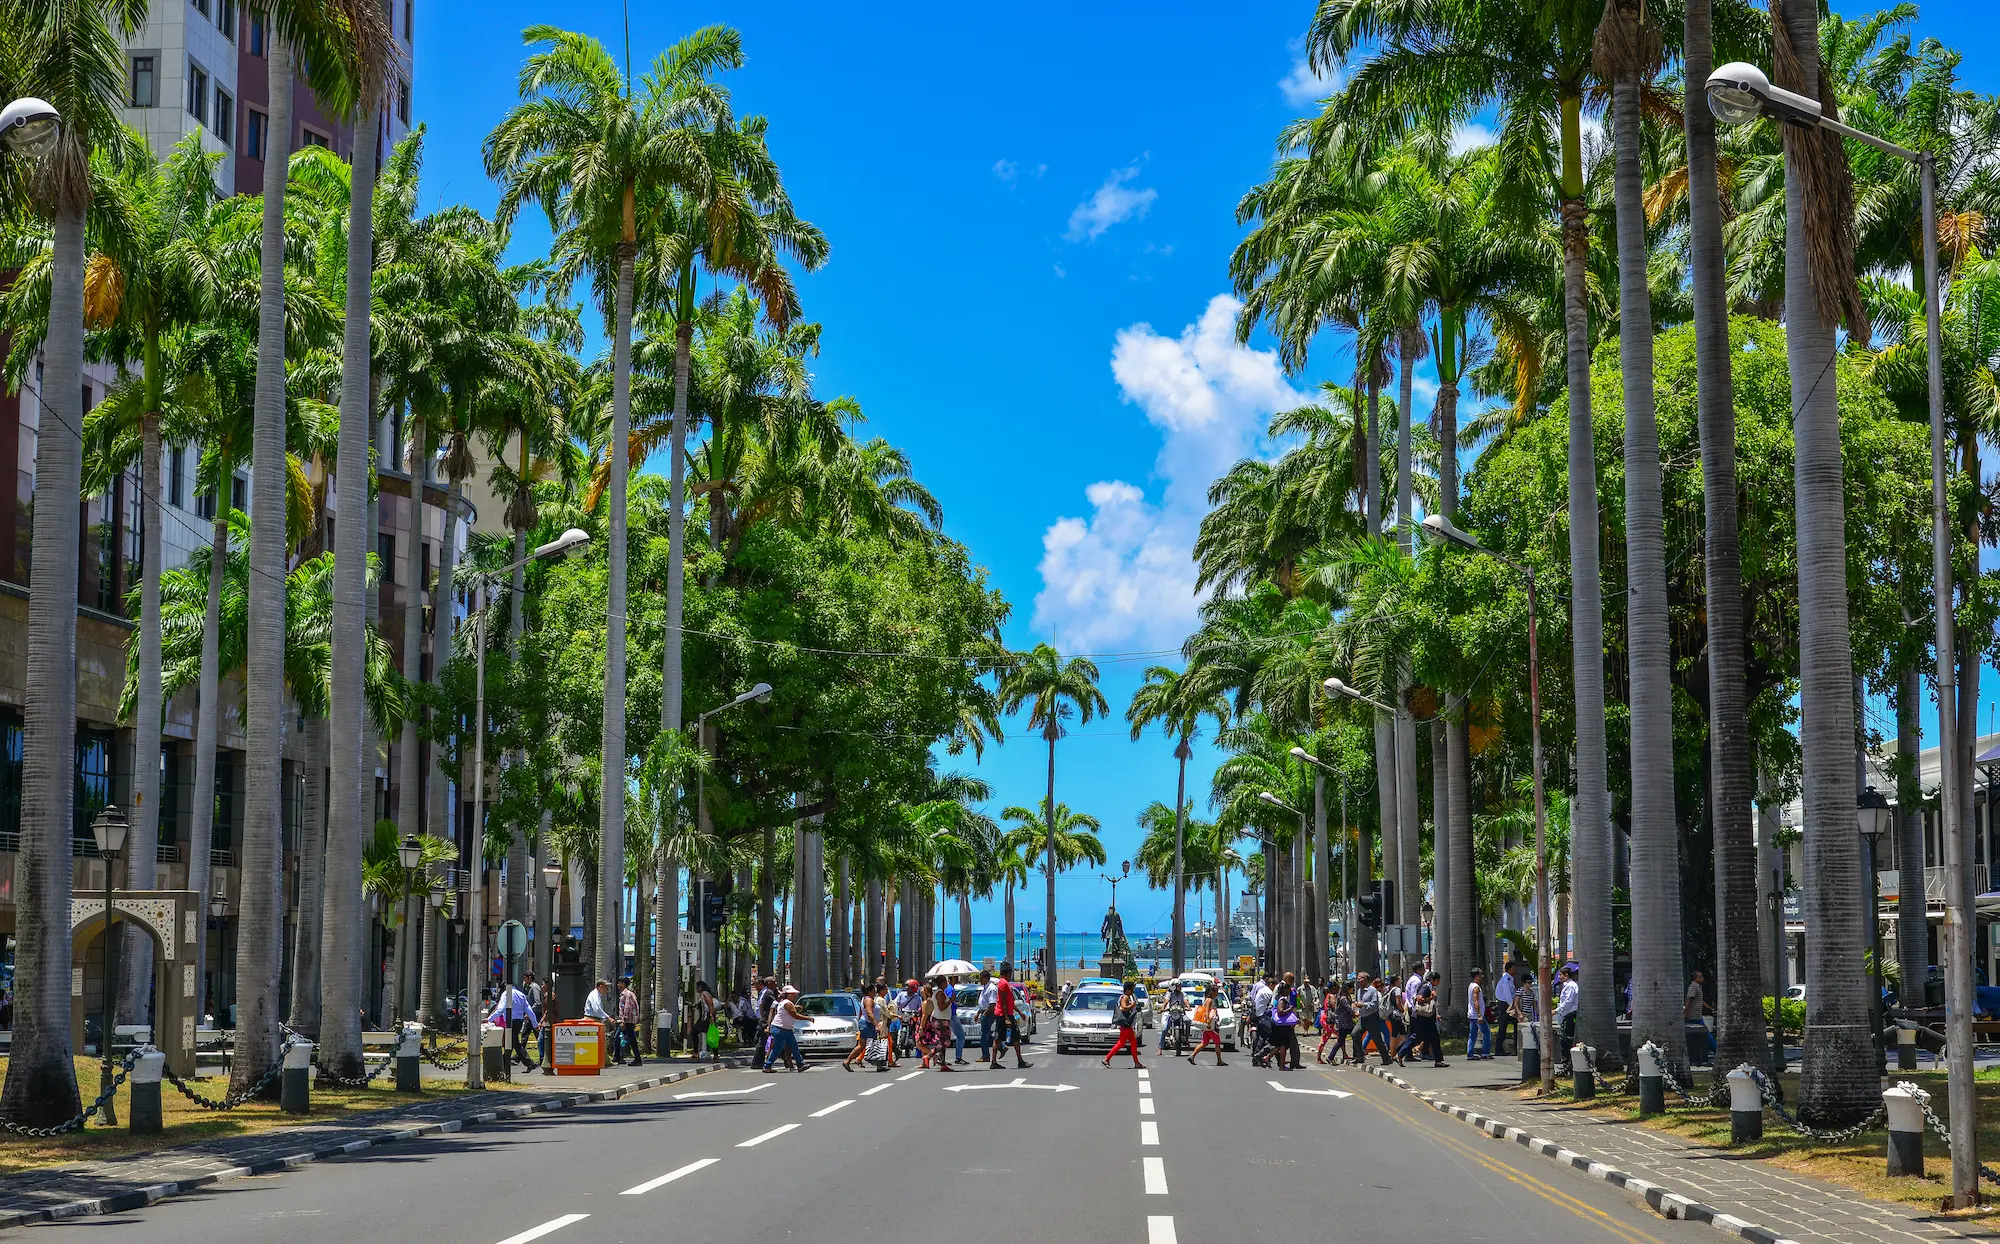 A main street, lined with palm trees, in Port Louis, Mauritius.